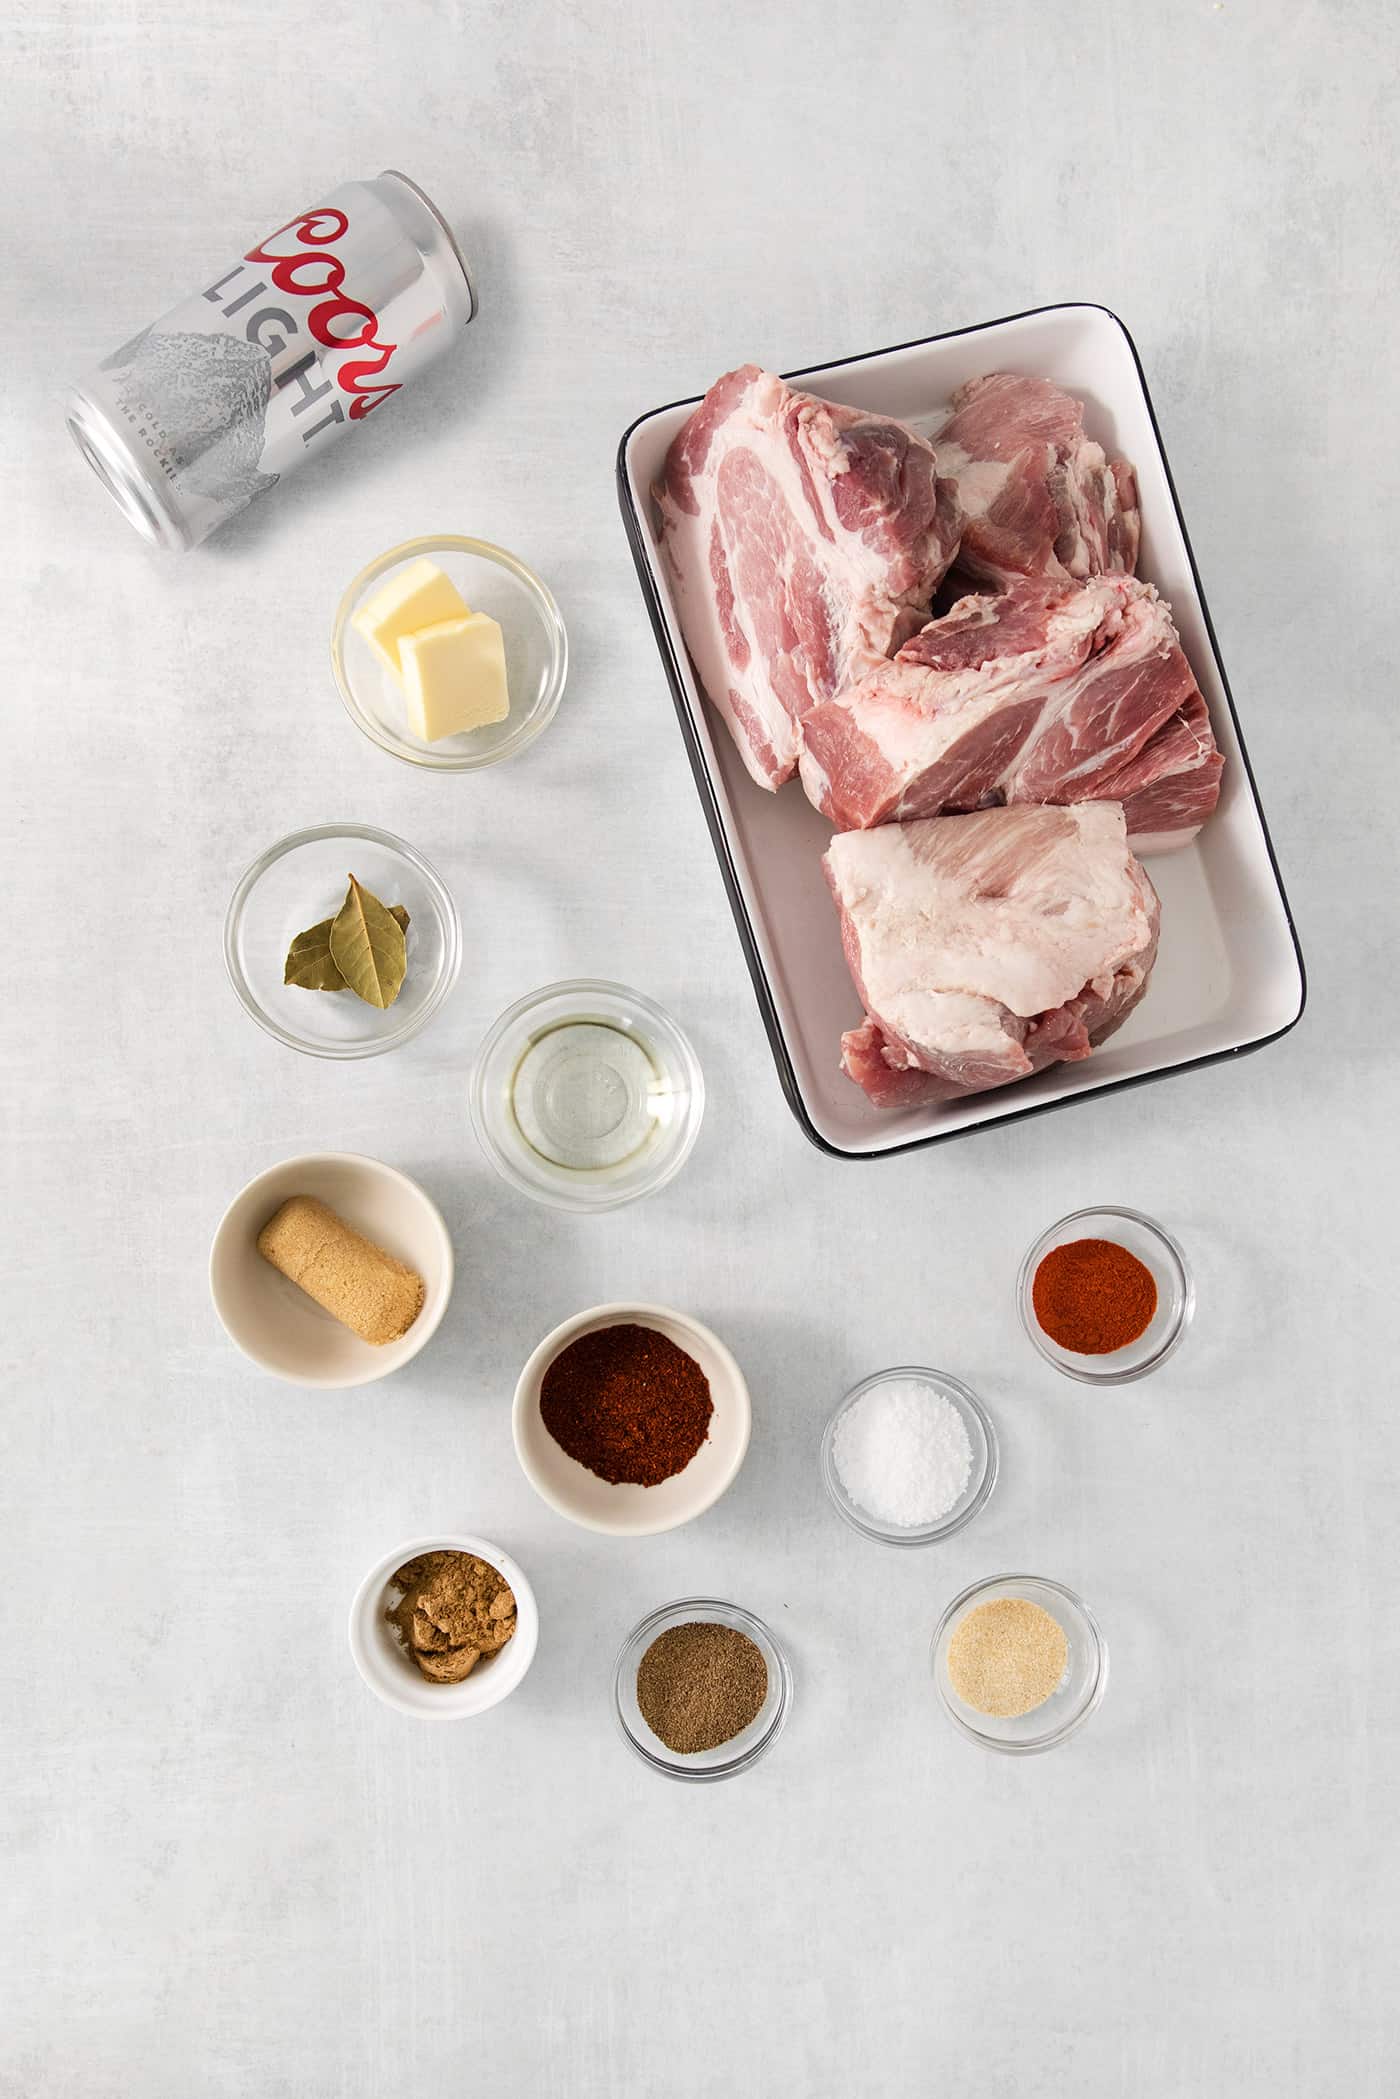 Ingredients needed to make pulled pork include butter, oil, and seasonings.